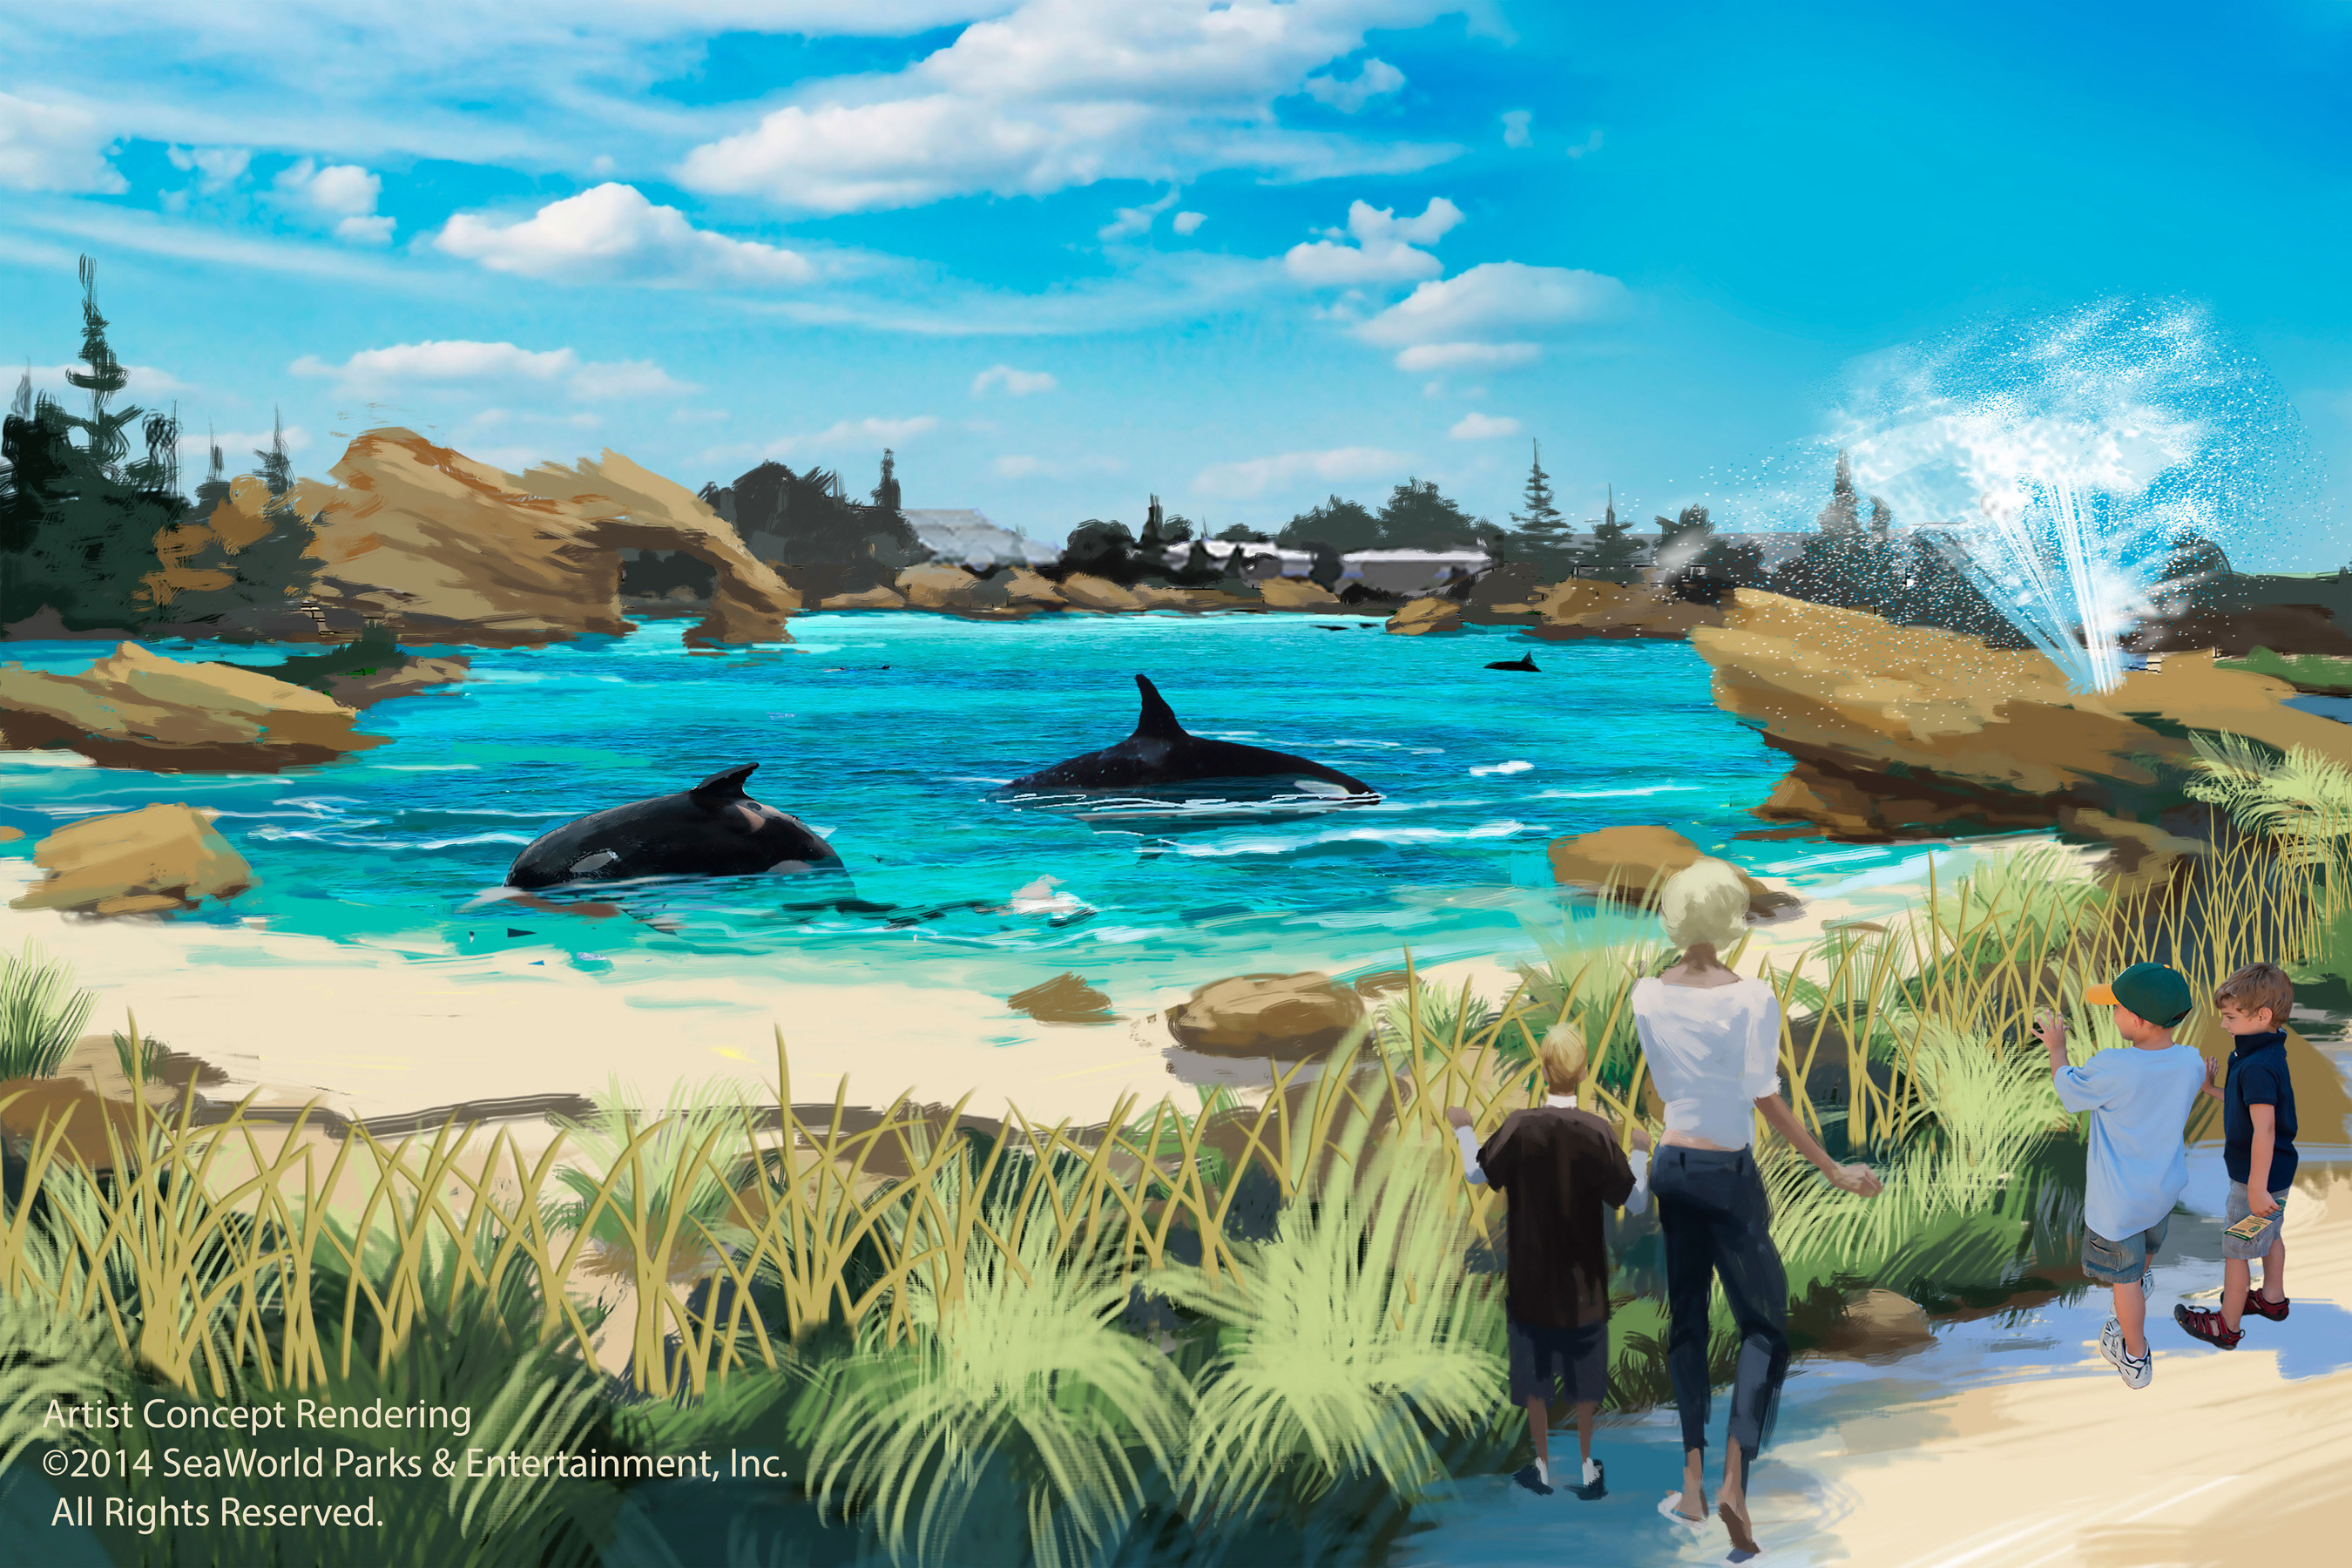 SeaWorld today announced Blue World Project, a massive expansion of the parks' killer whale environments. The first, at SeaWorld San Diego, will nearly double the size of the existing habitat, with a volume of 10 million gallons of chilled seawater. (PRNewsFoto/SeaWorld Entertainment, Inc.)